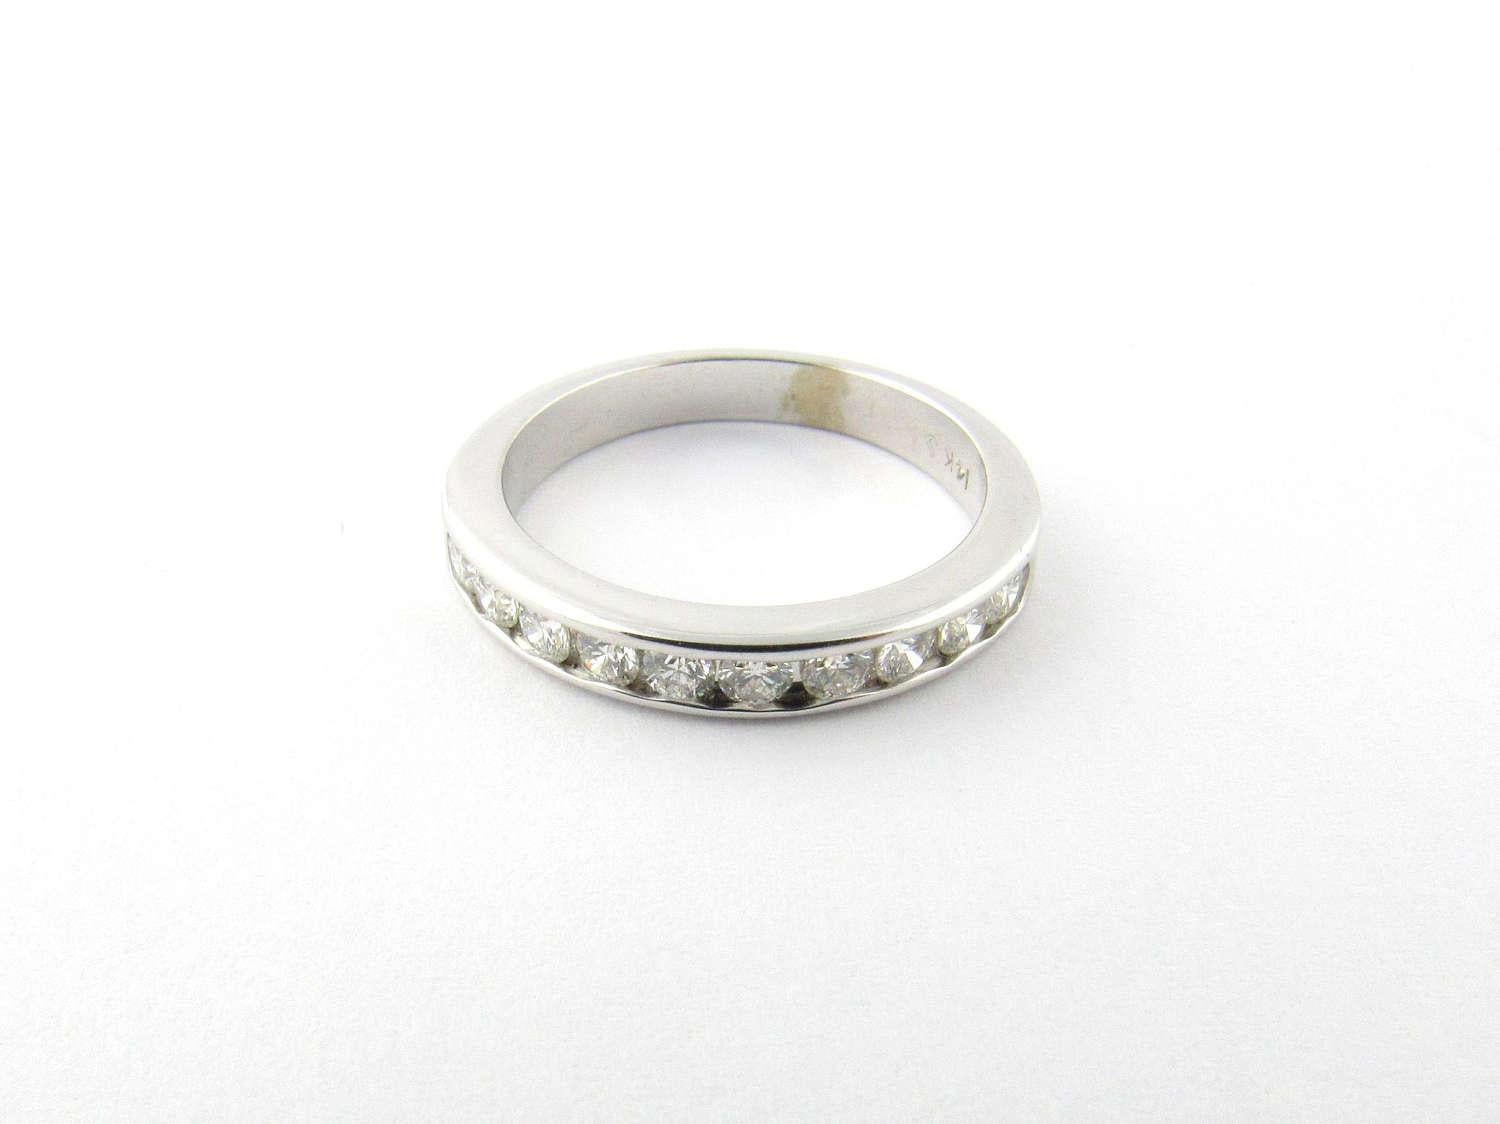 Vintage 14K White Gold and Diamond Band Size 7 

This white gold band is channel set with 10 diamonds. 

Approx. .40 carats total. SI clarity, J color 

Shank is approx. 3 mm wide. 

Hallmarked and stamped 14K 

2.3dwt / 3.7 g 

This ring will be